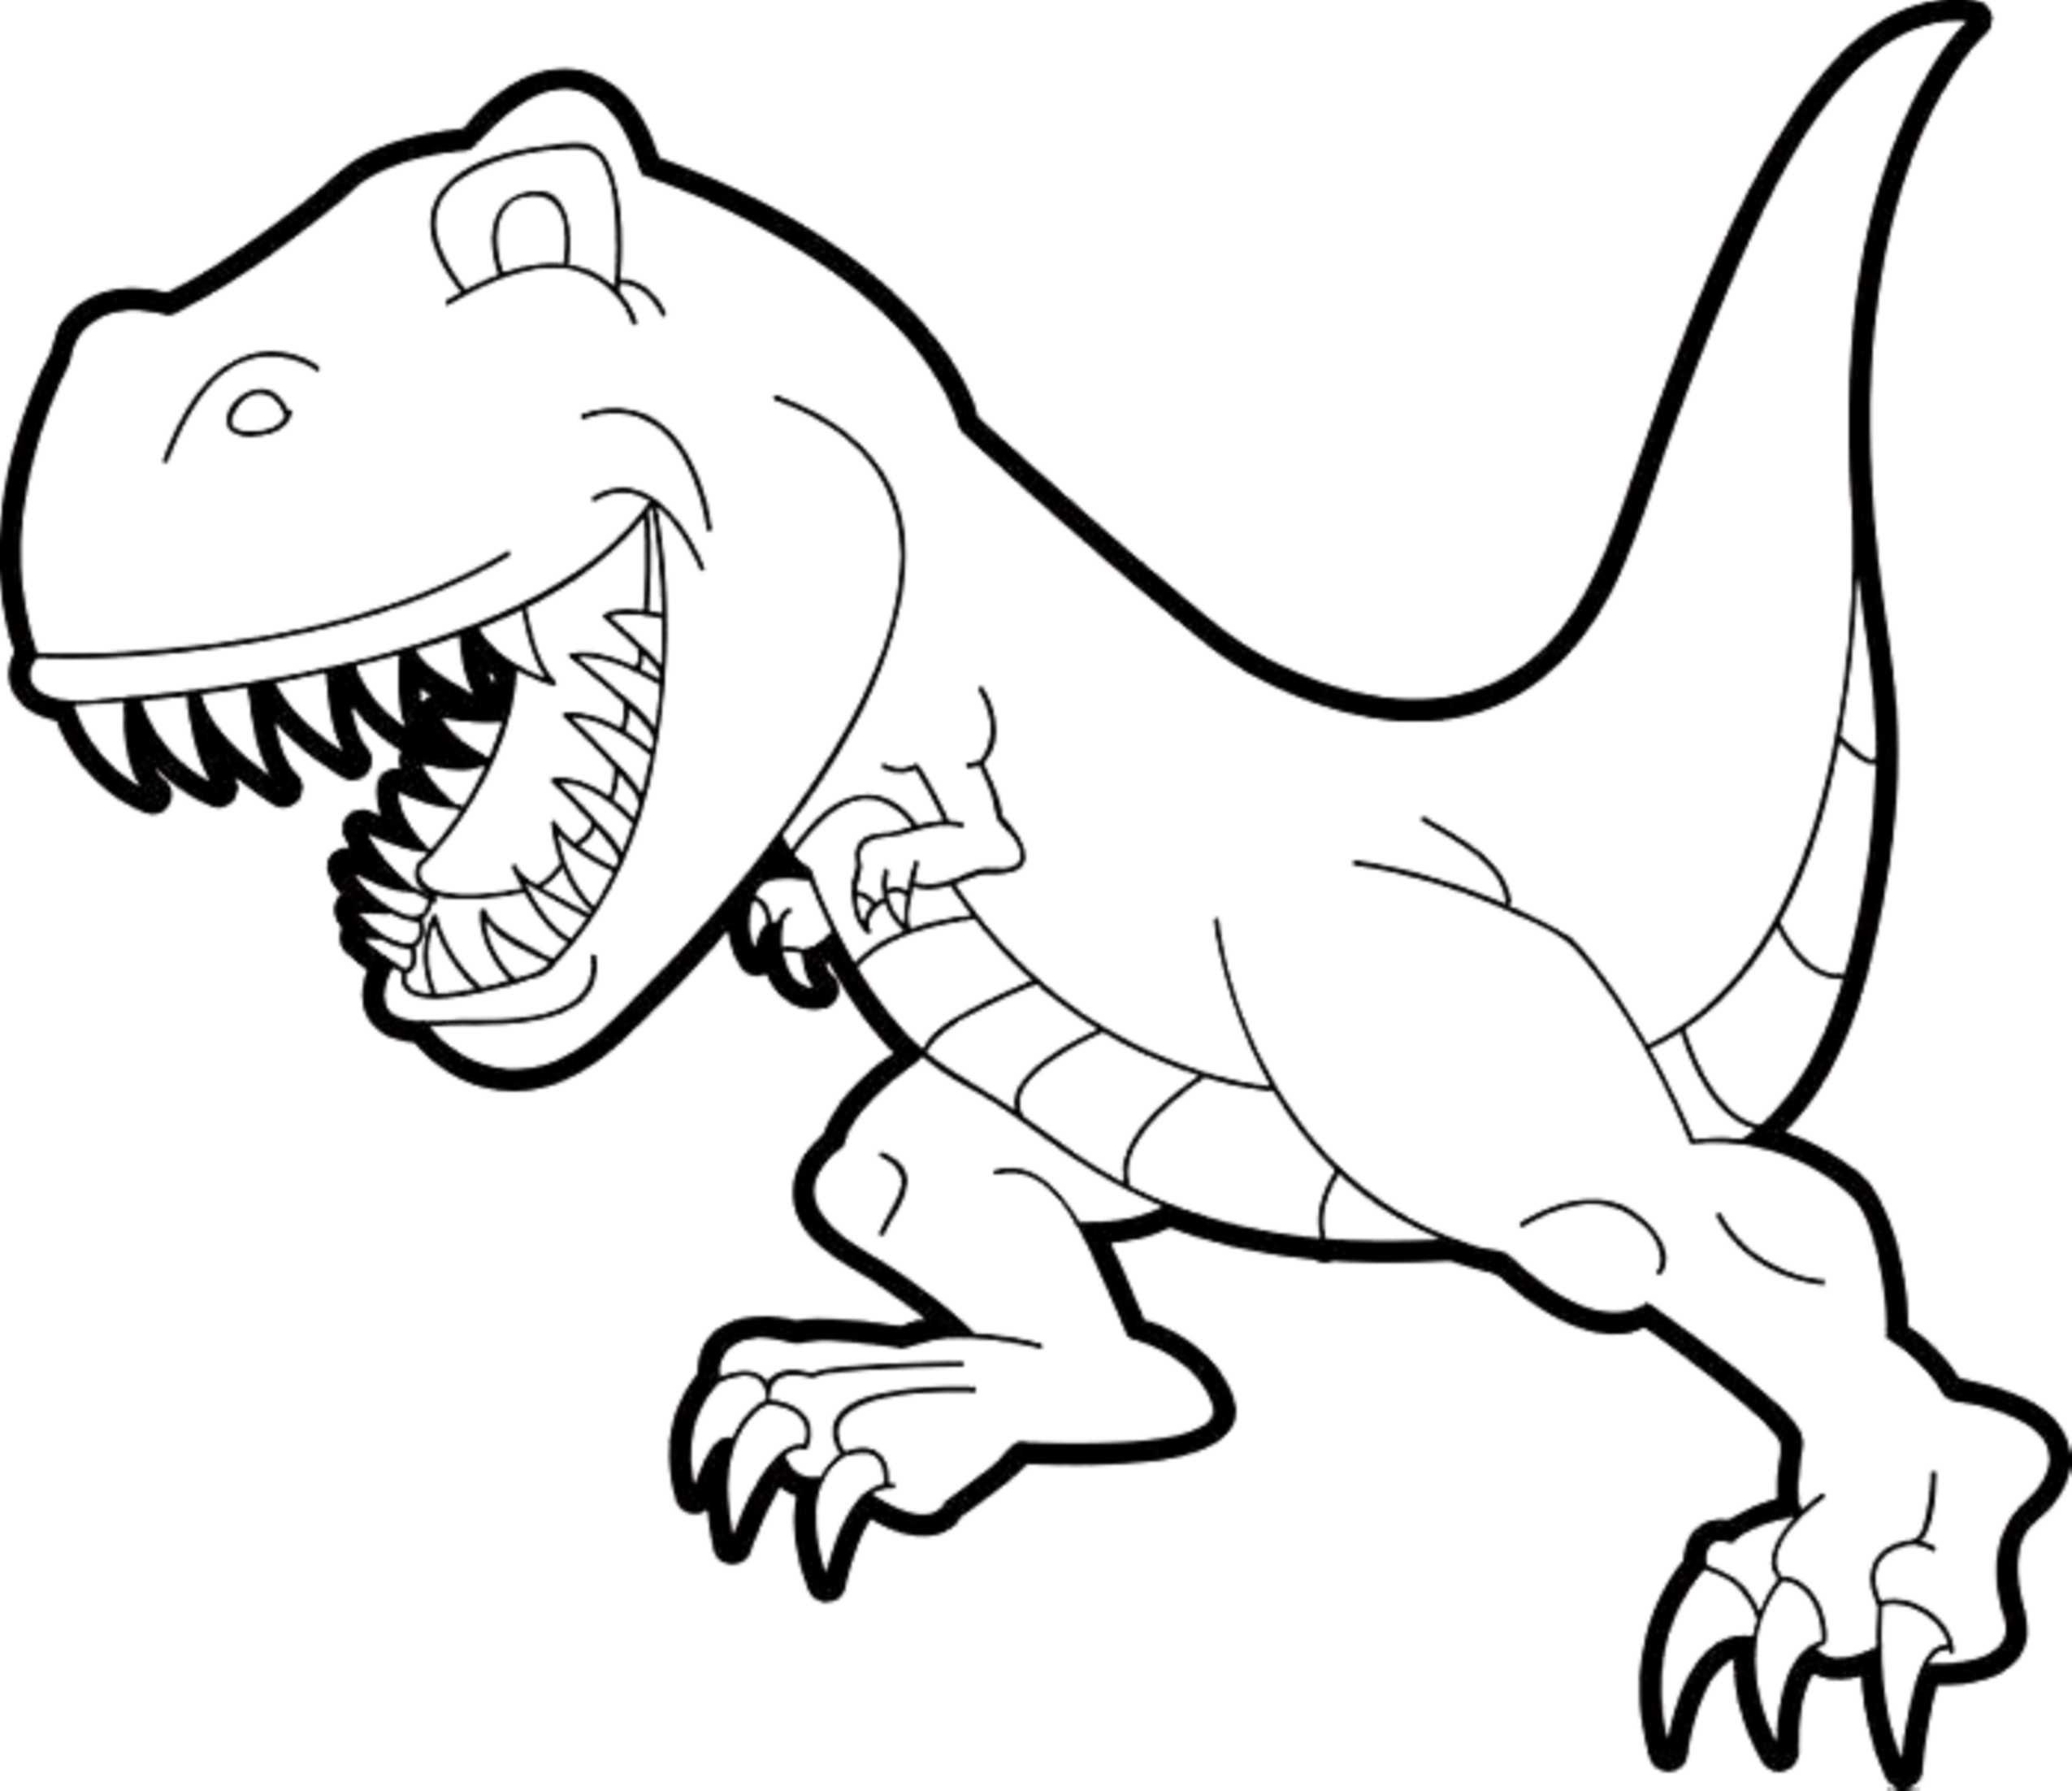 Coloring Page Of A T Rex